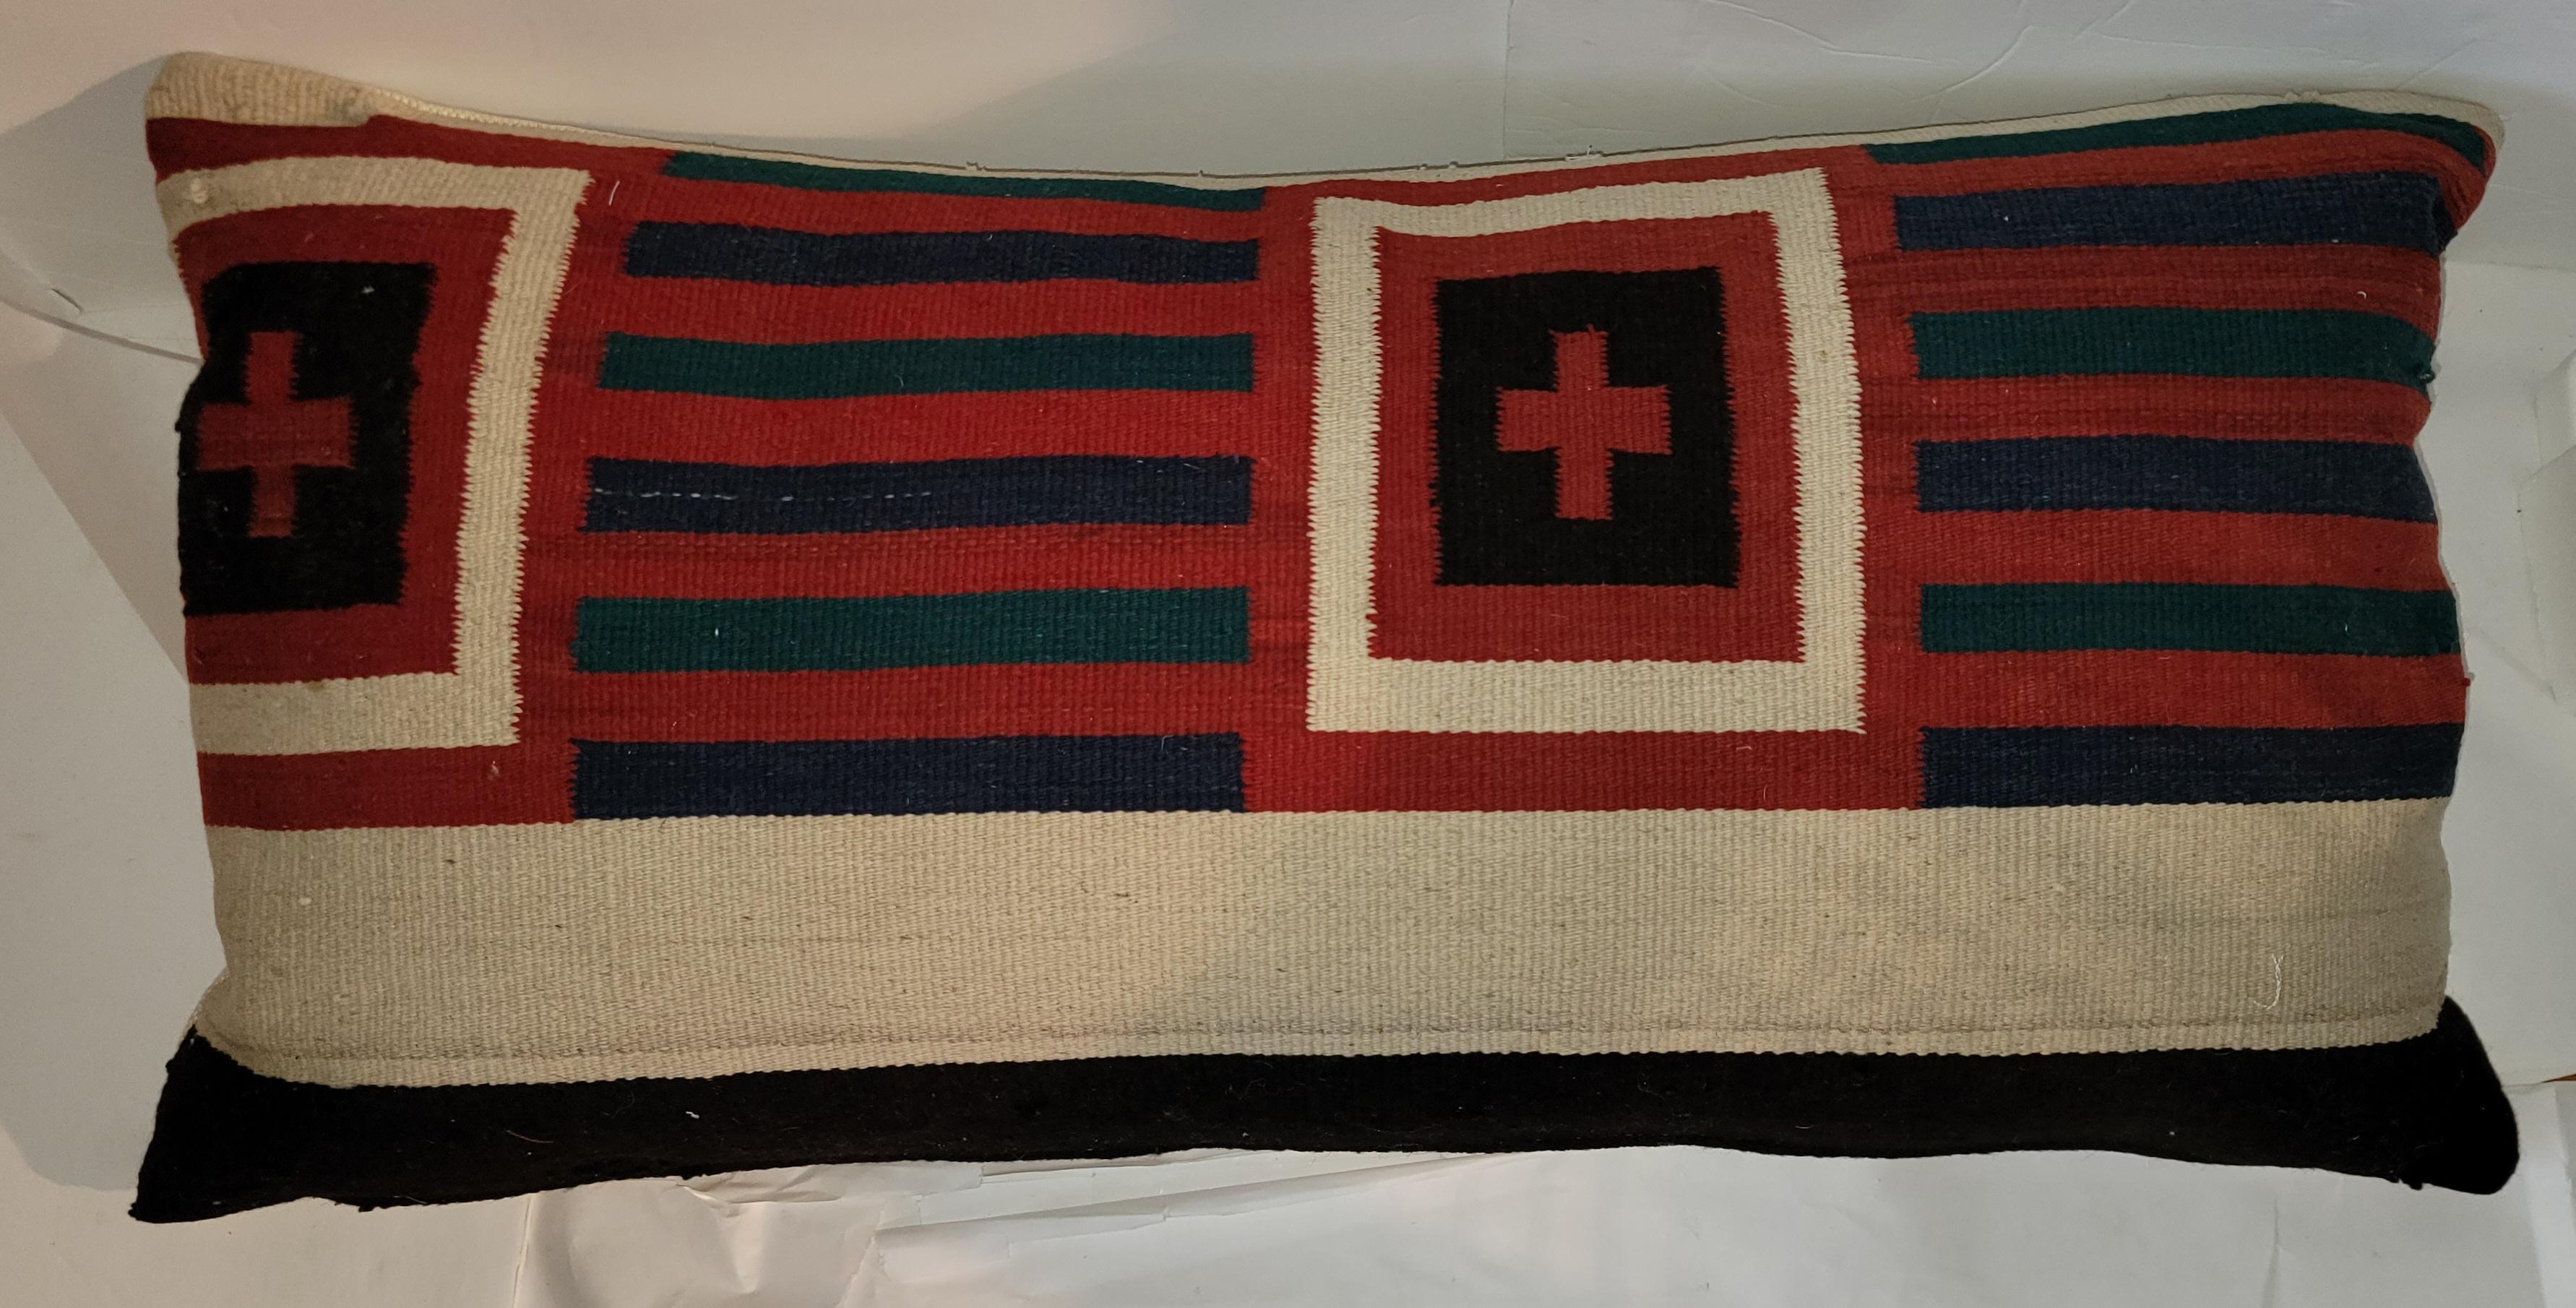 Navajo Indian Weaving Pillow with Cross. 
Feather and down insert and zippered sham.